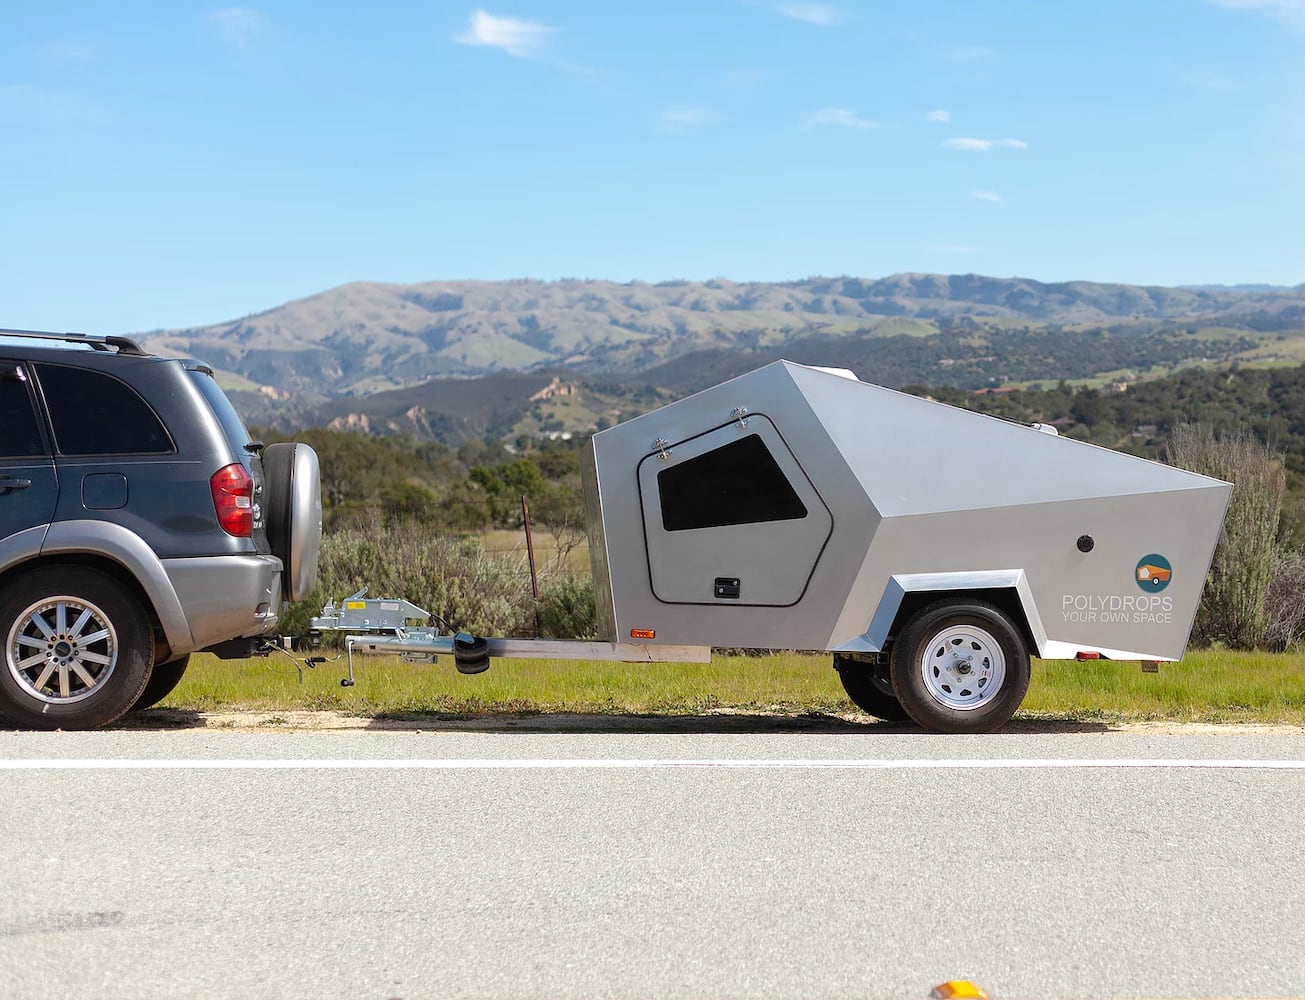 Polydrops Trailer Traveling Camper is your own space for trips